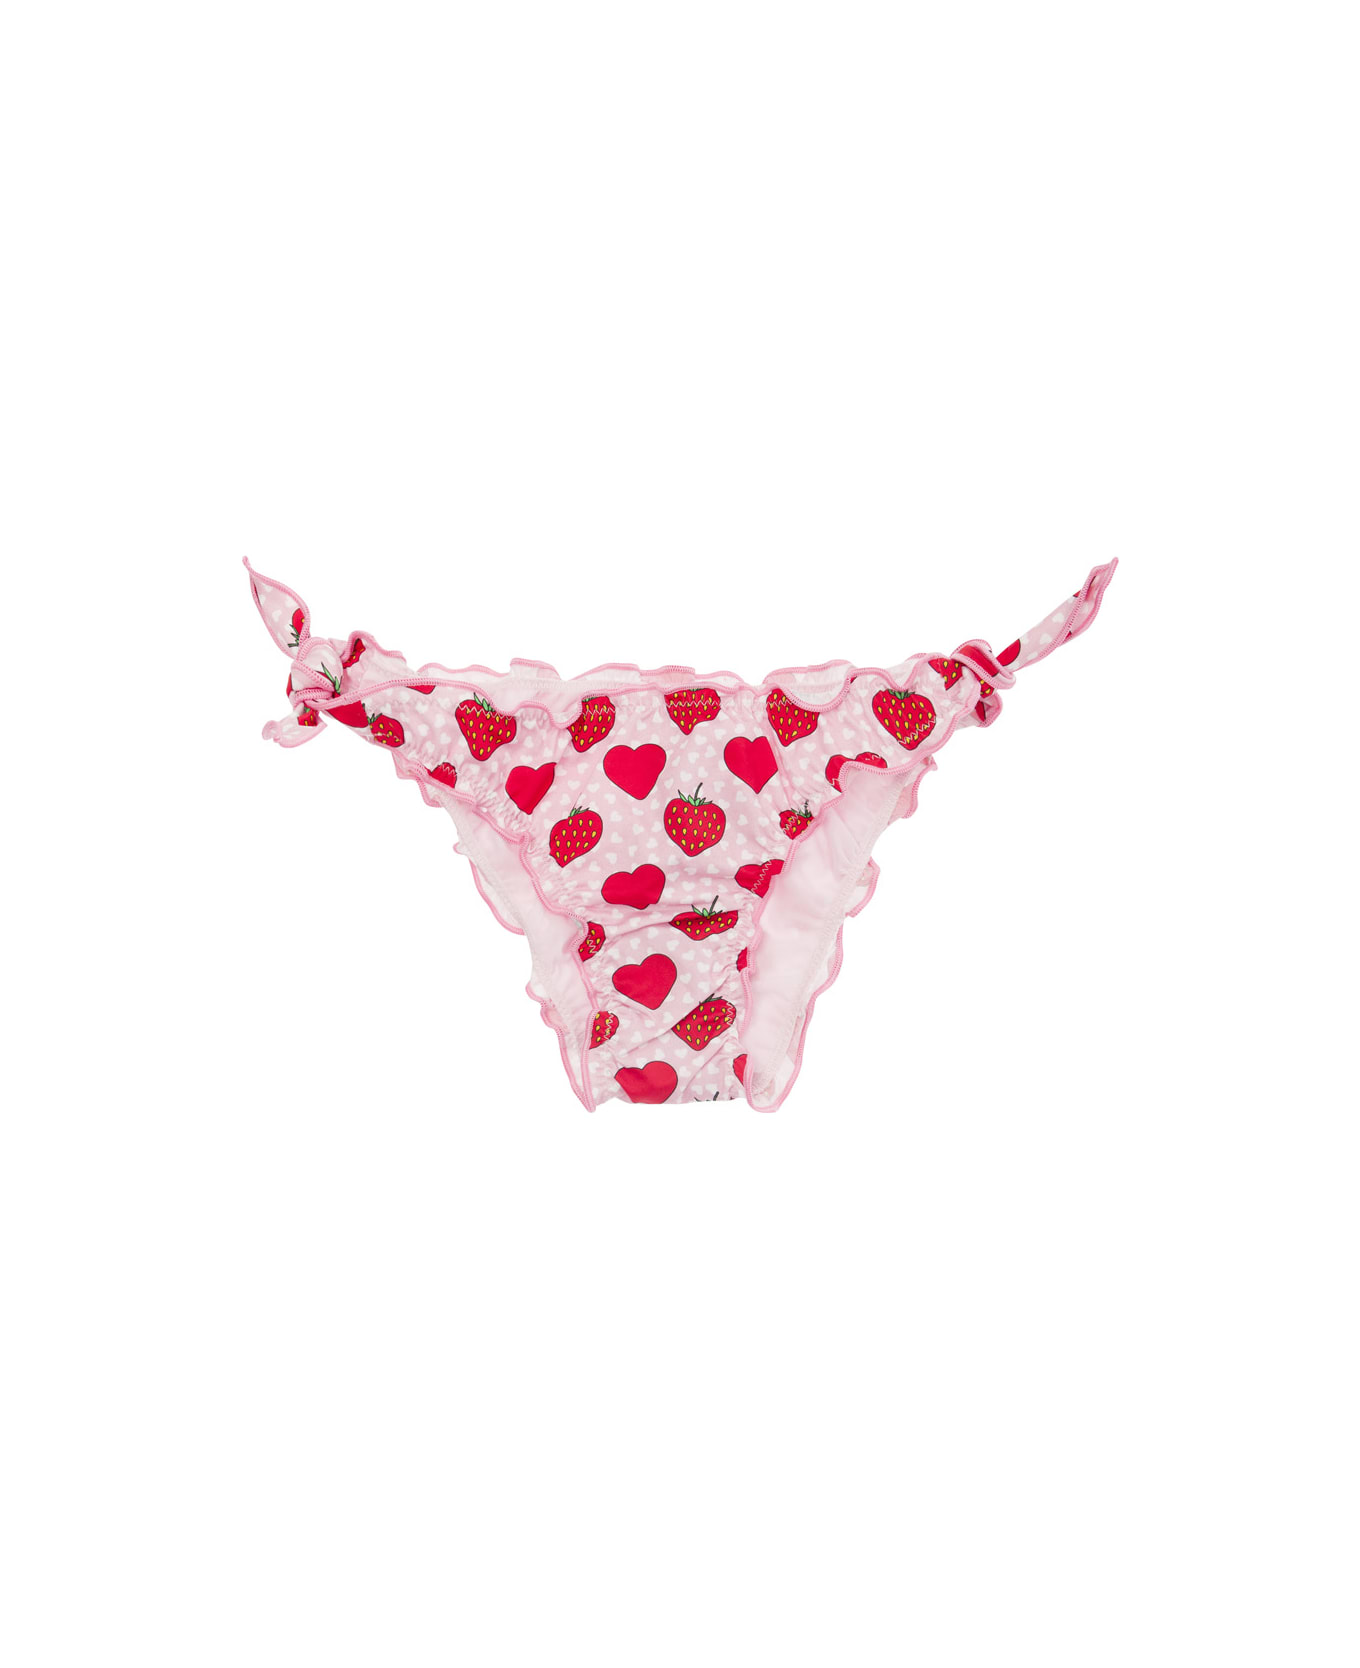 MC2 Saint Barth Pink And Red Bikini Bottom With Strawberry Print In Stretch Fabric Baby - Multicolor